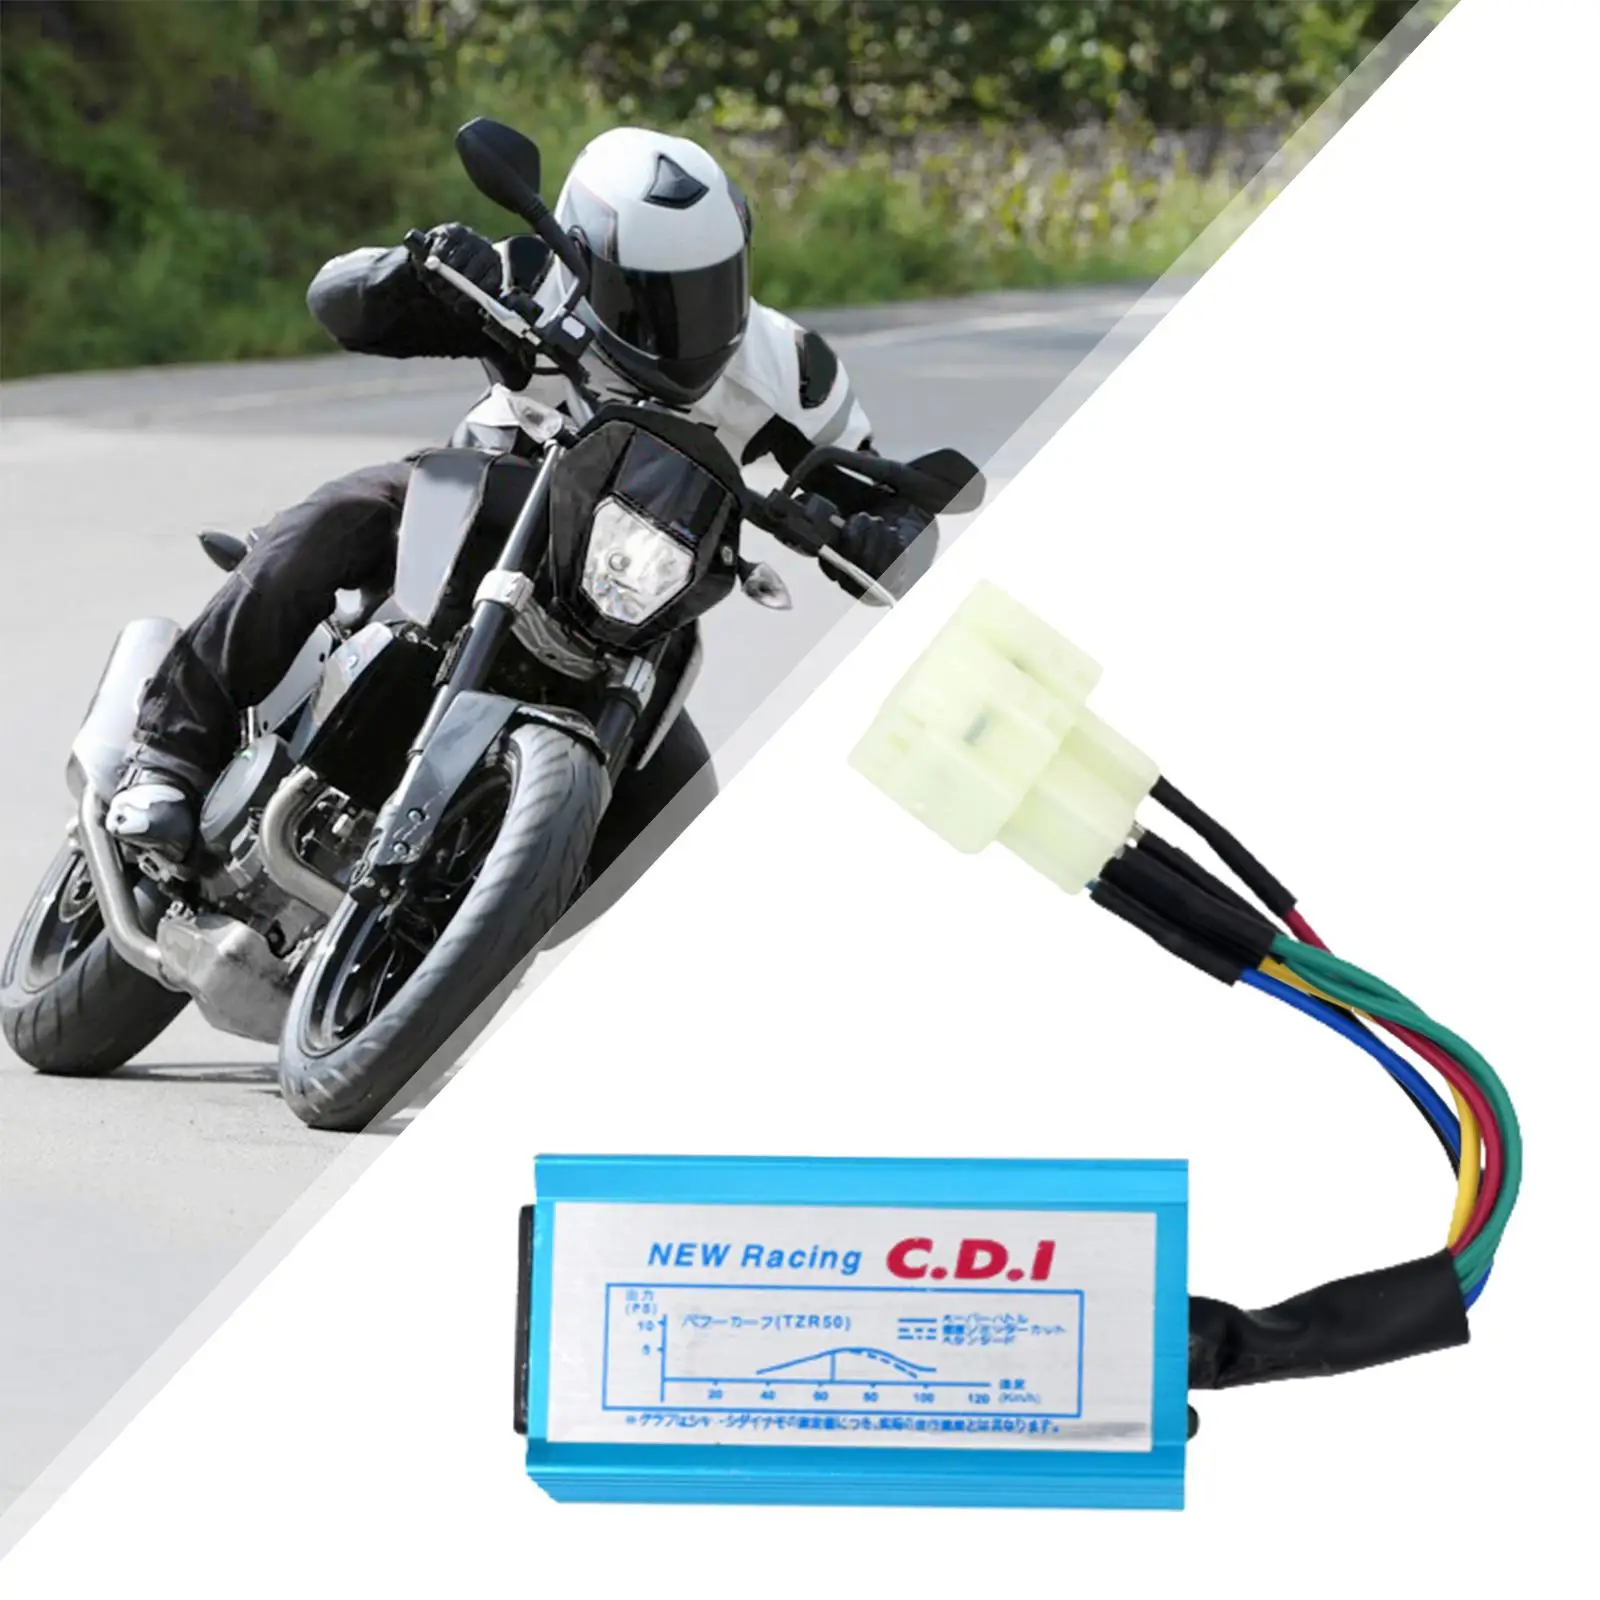 6 6  Cdi Box  Performance Aluminum Alloy Fits for Gy6 50cc-250cc Series Engines Motorcycle ATV Bike Mopeds